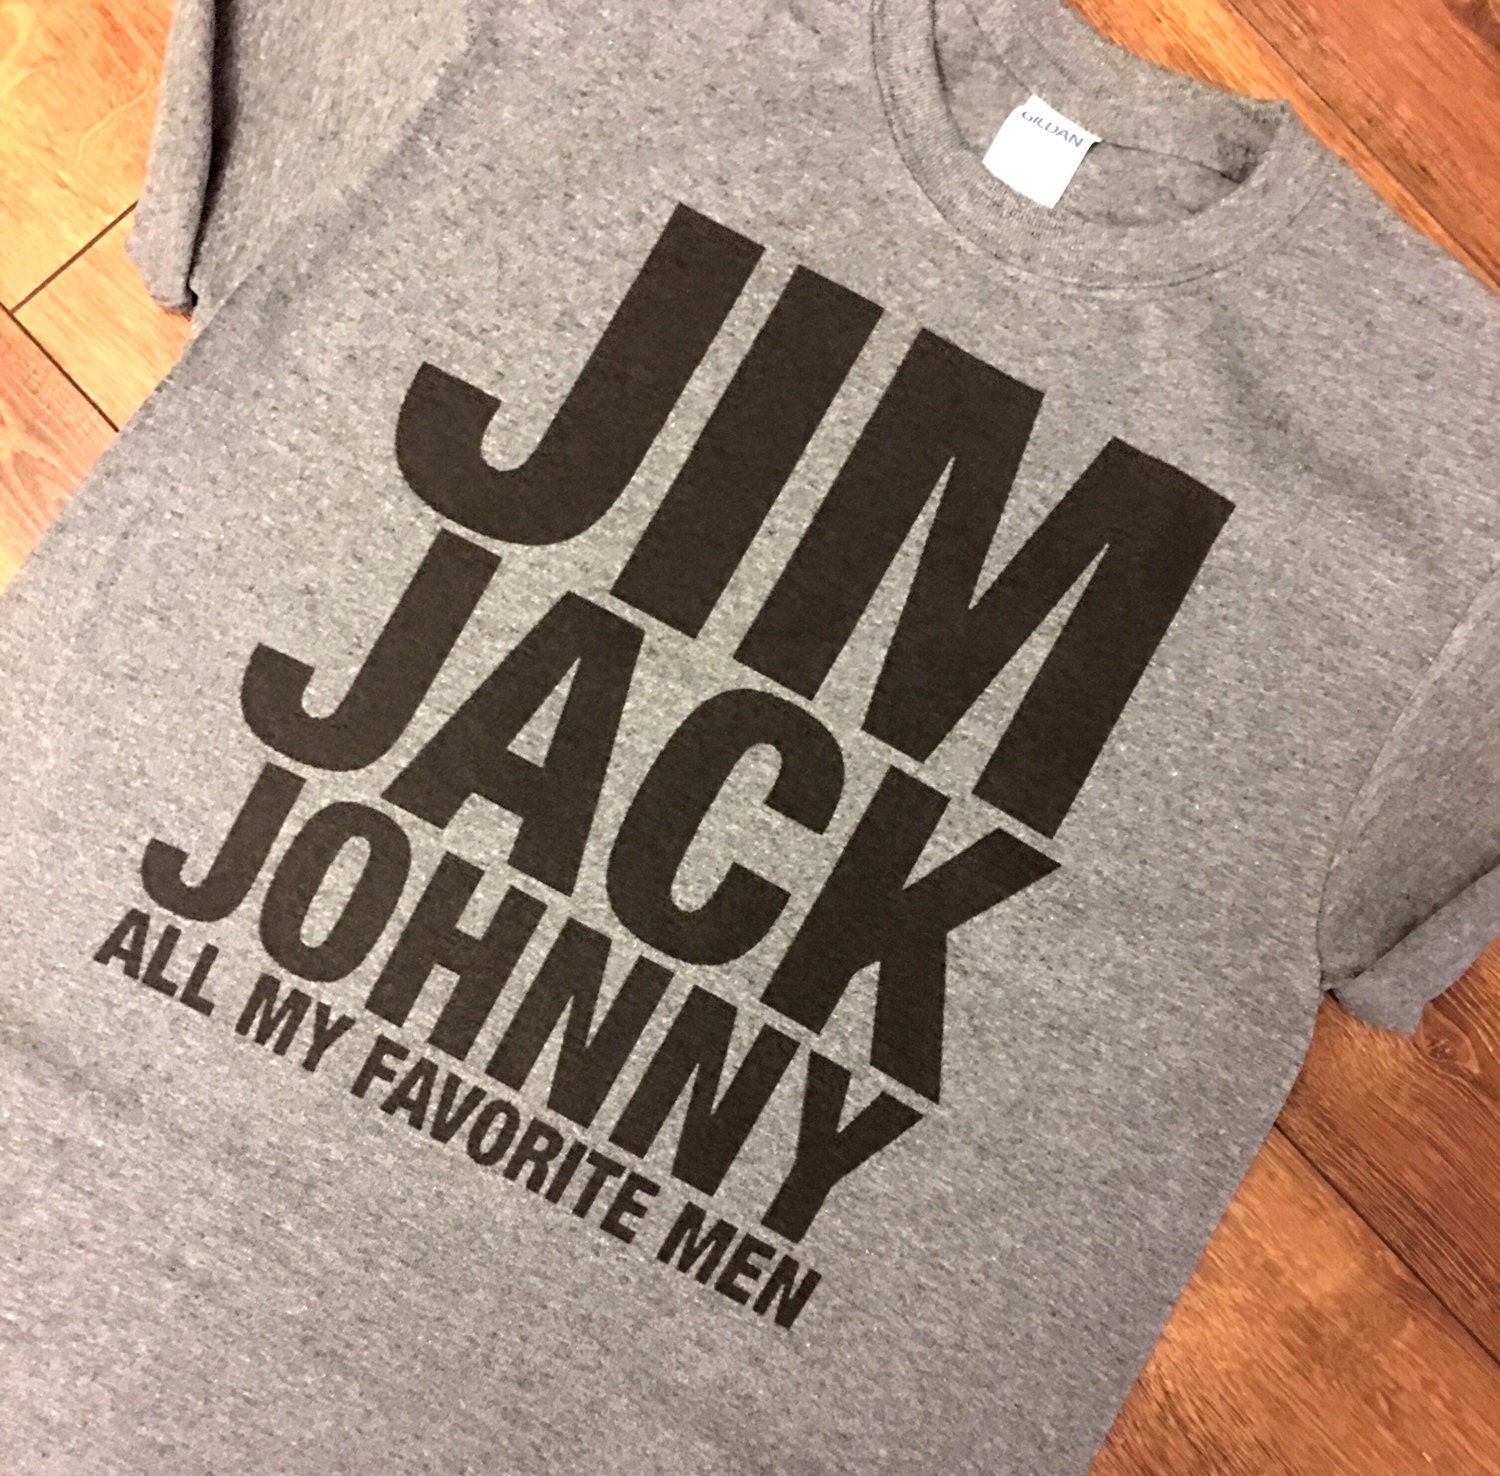 Unisex; T-shirt; jim jack johnny; all my favorite men; Tops and Tees; bartender; college girl; Plus Size; tshirt; t shirt; whiskey gift